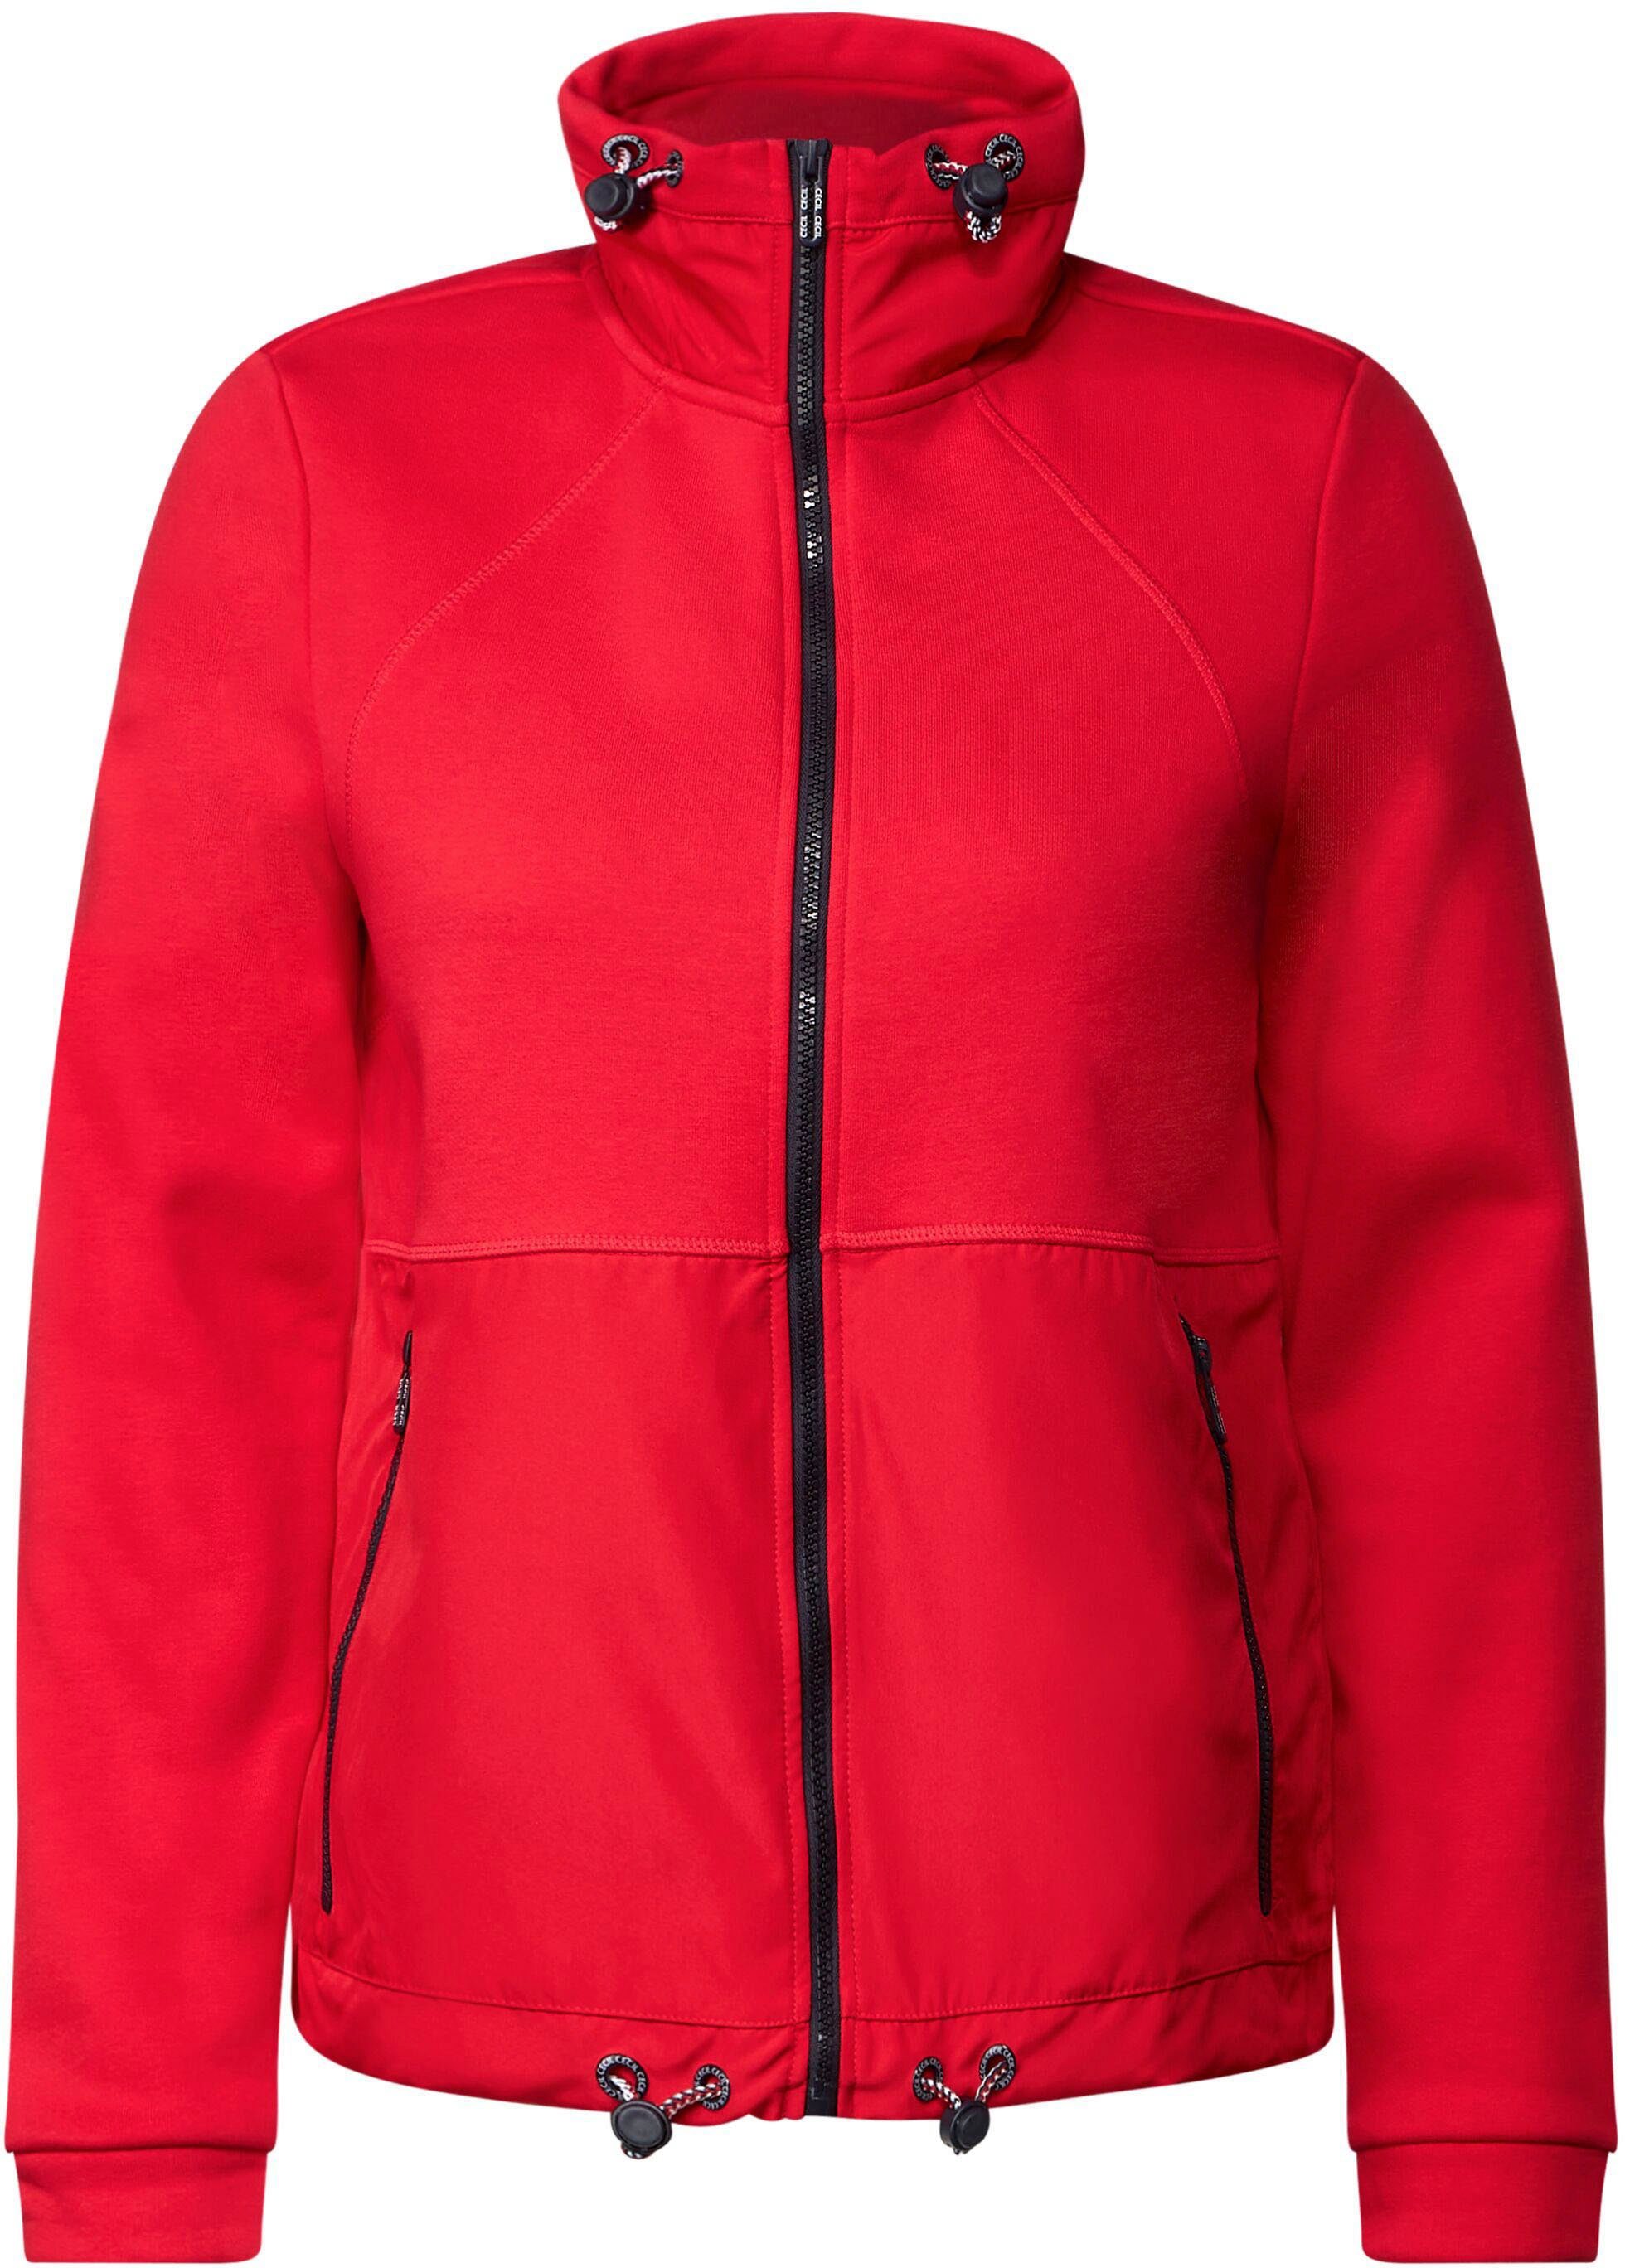 modernen strong im red Cecil Materialmix Sweatjacke